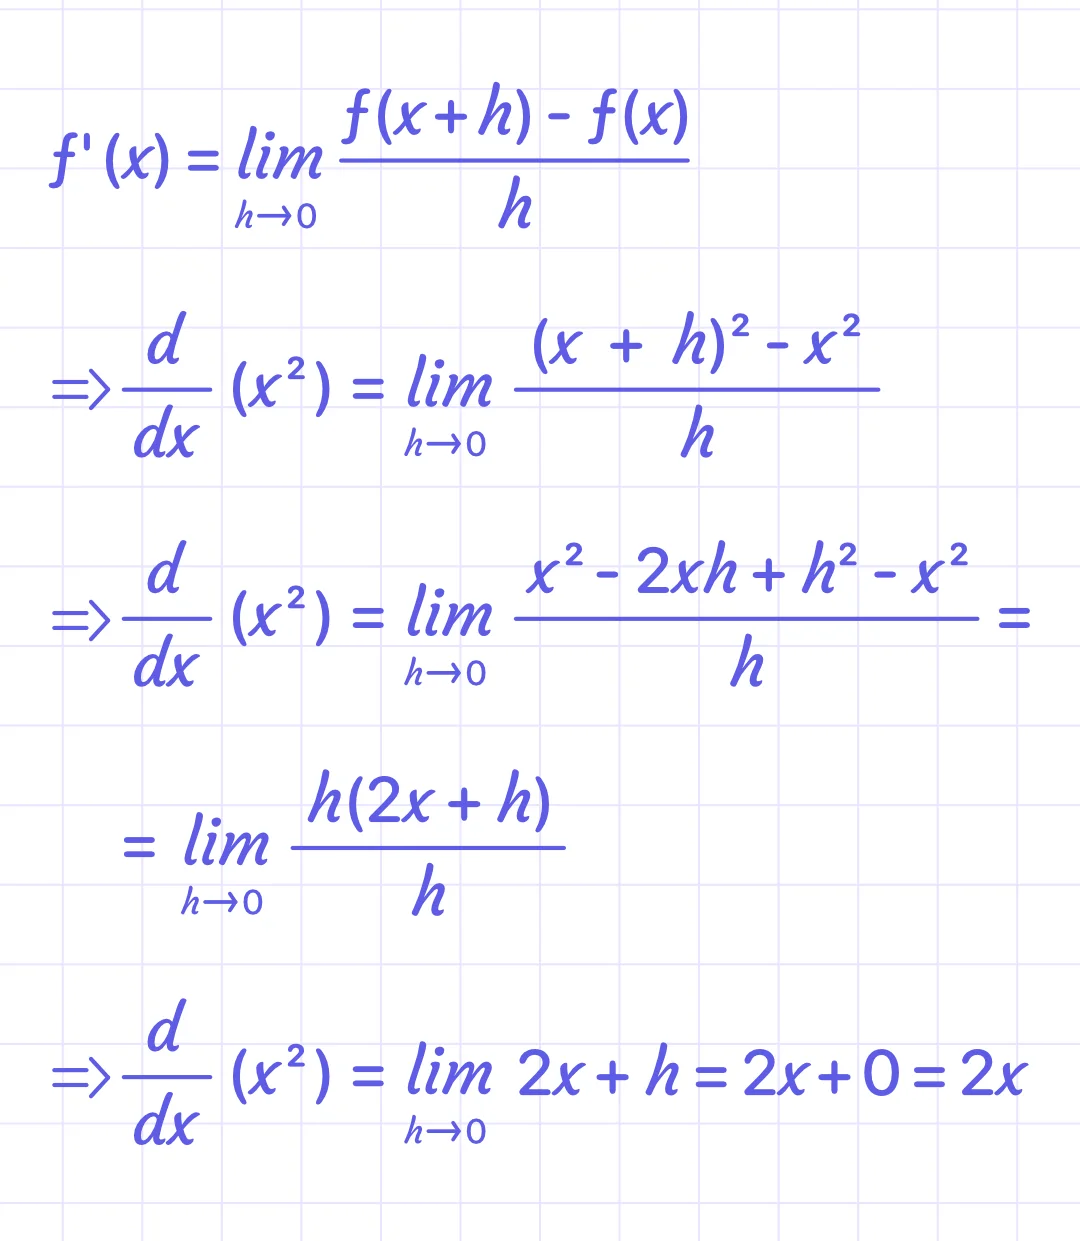 solution for example 3